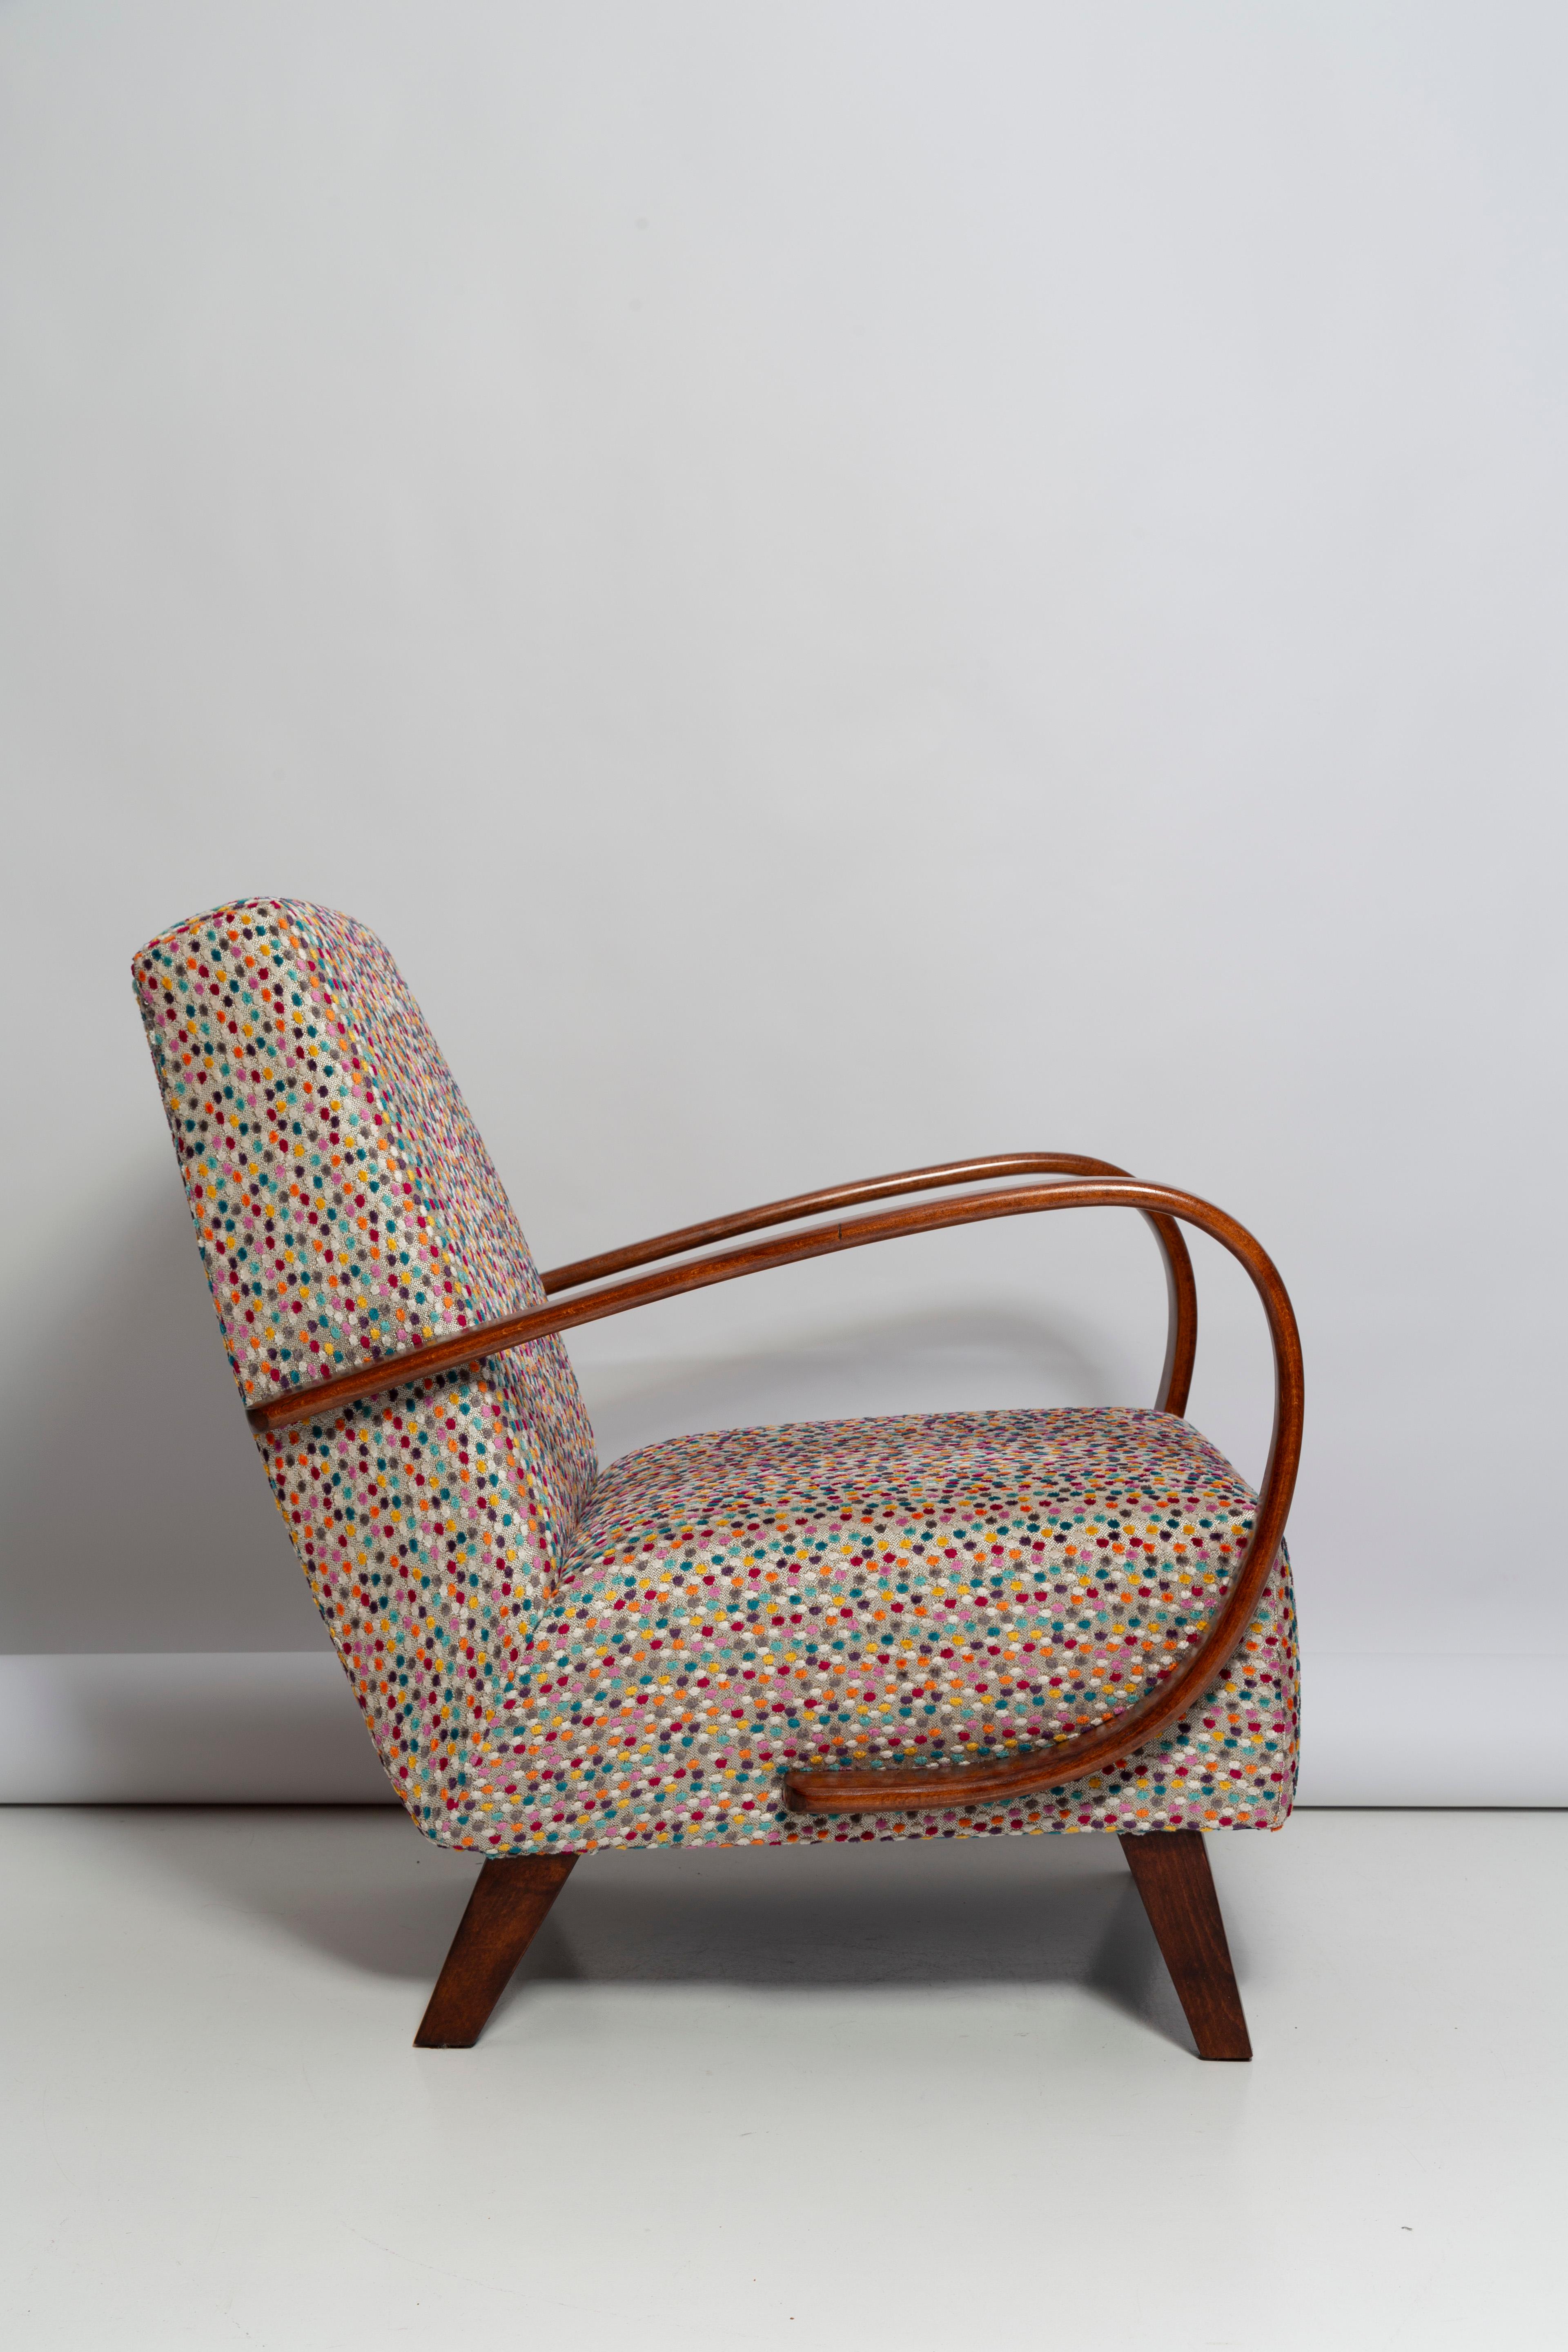 Hand-Crafted Mid Century Dots Velvet Armchair by J. Halabala, Czech Republic, 1950s For Sale